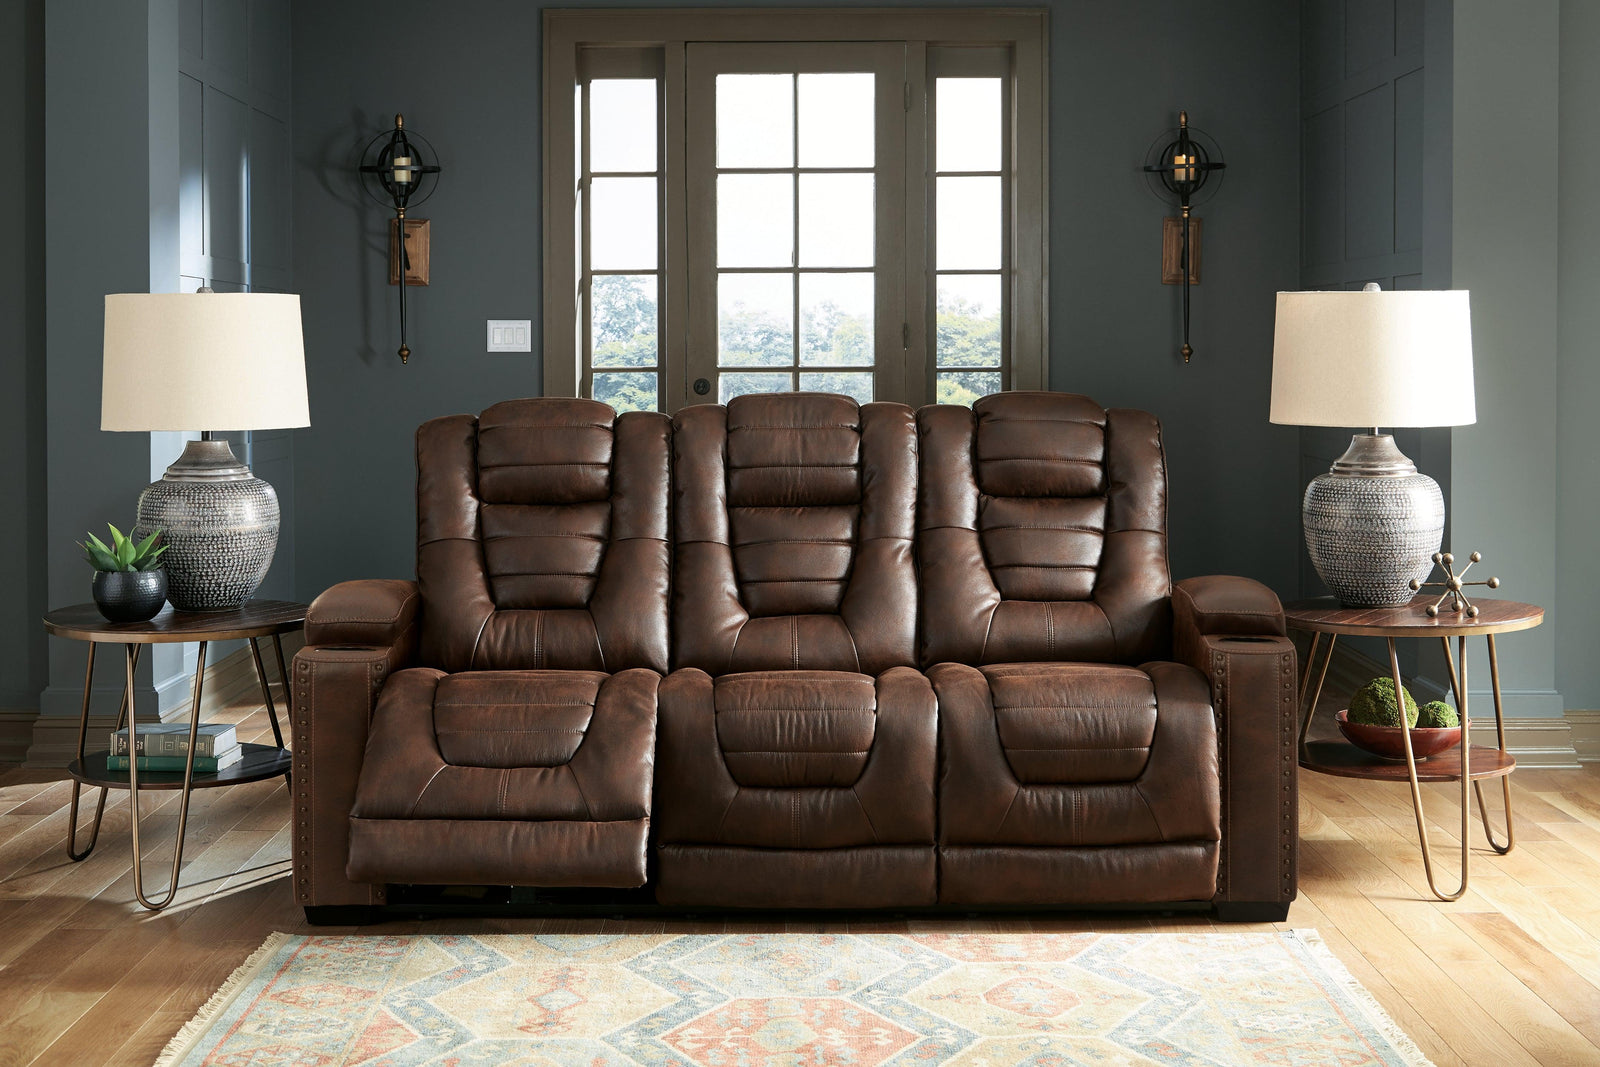 Owner's Box Thyme Faux Leather Power Reclining Sofa